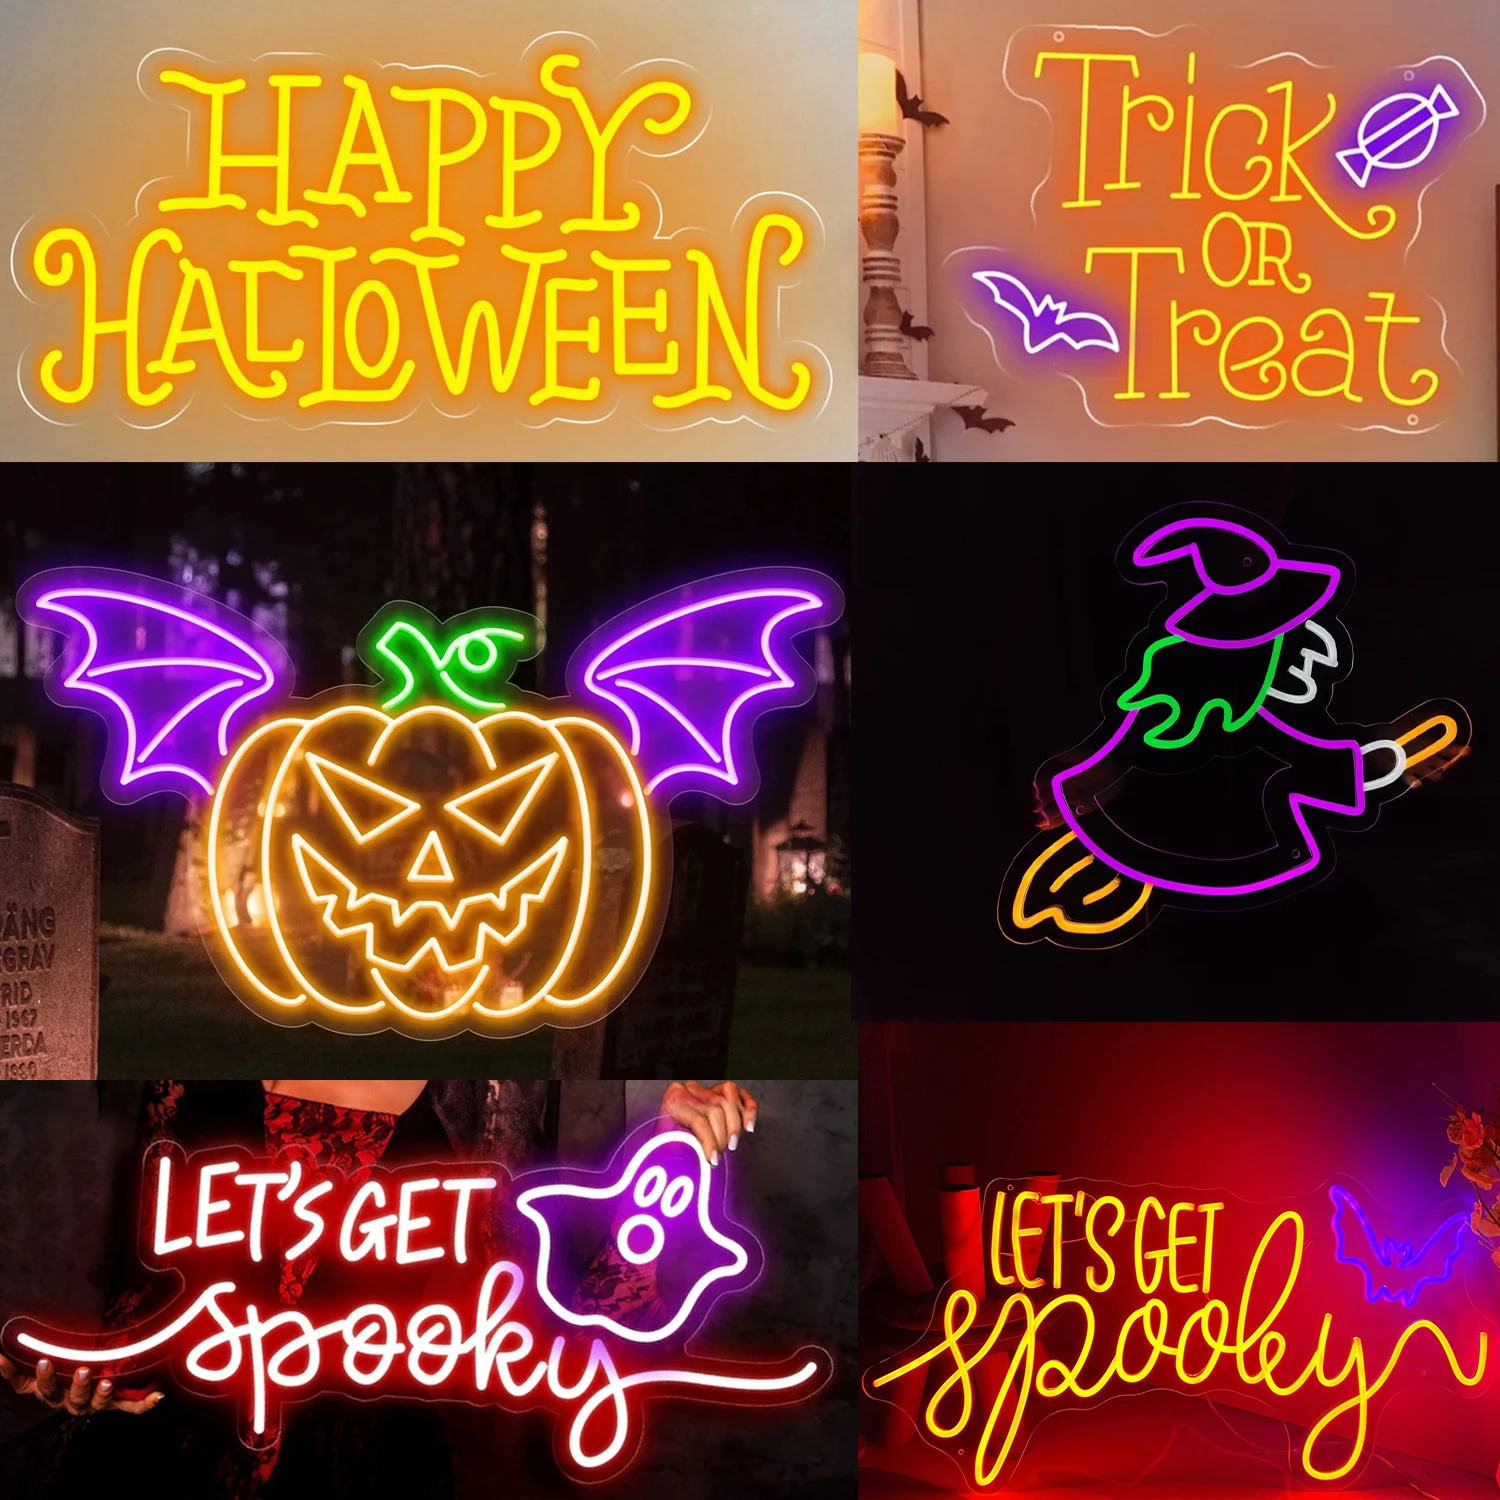 Halloween Neon Sign Halloween Party Decorations Funky Neon Sign Halloween LED Light Halloween Neon Sign Spooky Wall Decoration